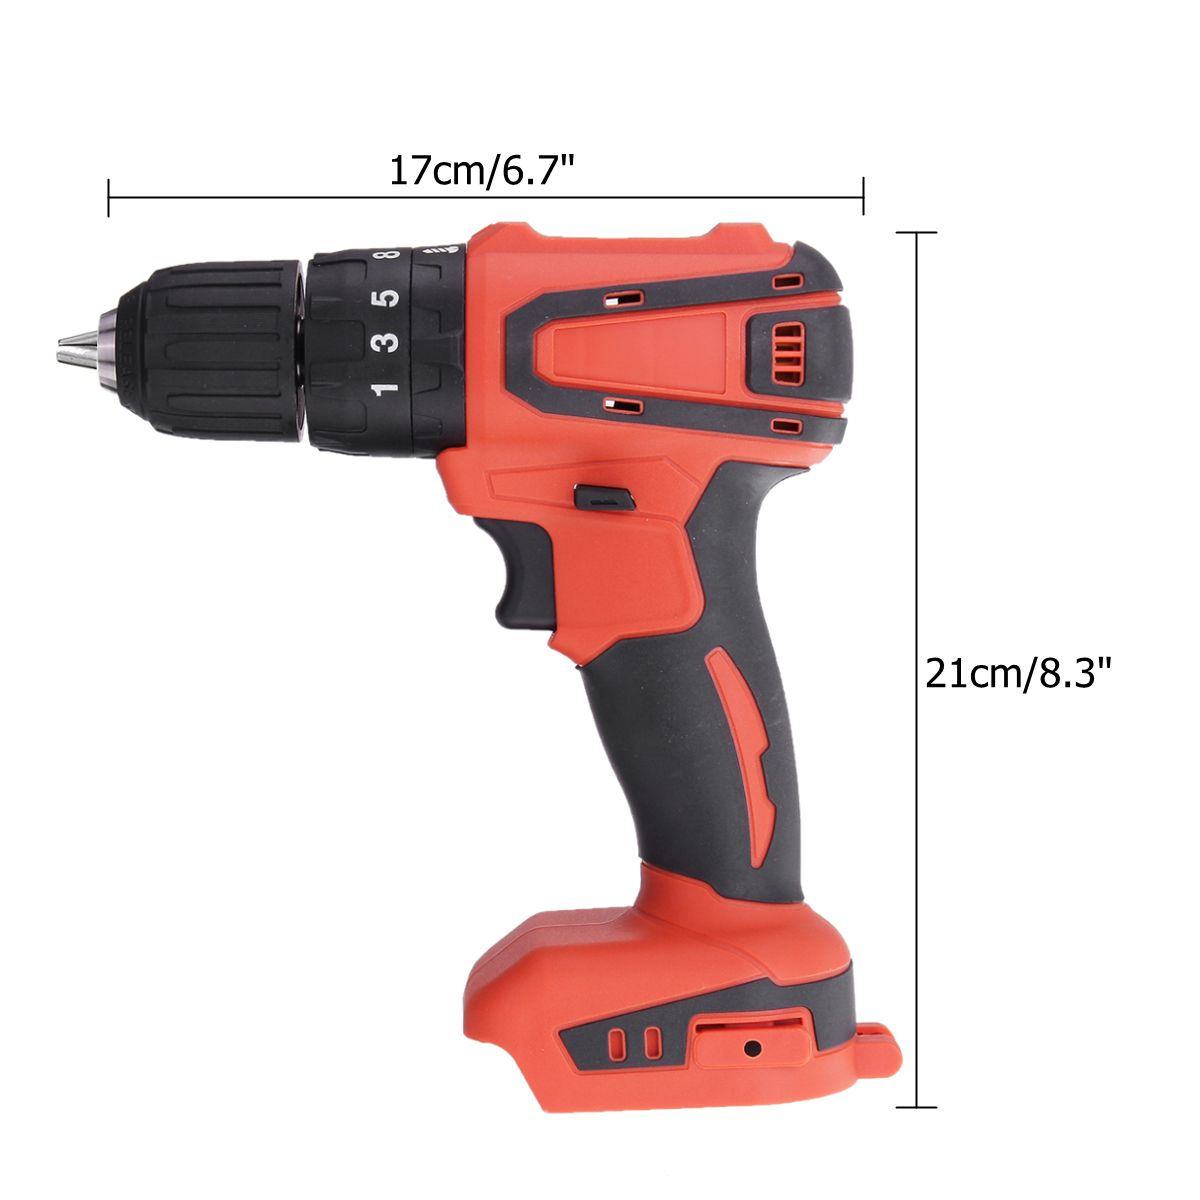 520Nm-Brushless-Cordless-38-Impact-Drill-Driver-Replacement-for-Makita-18V-Battery-1752272